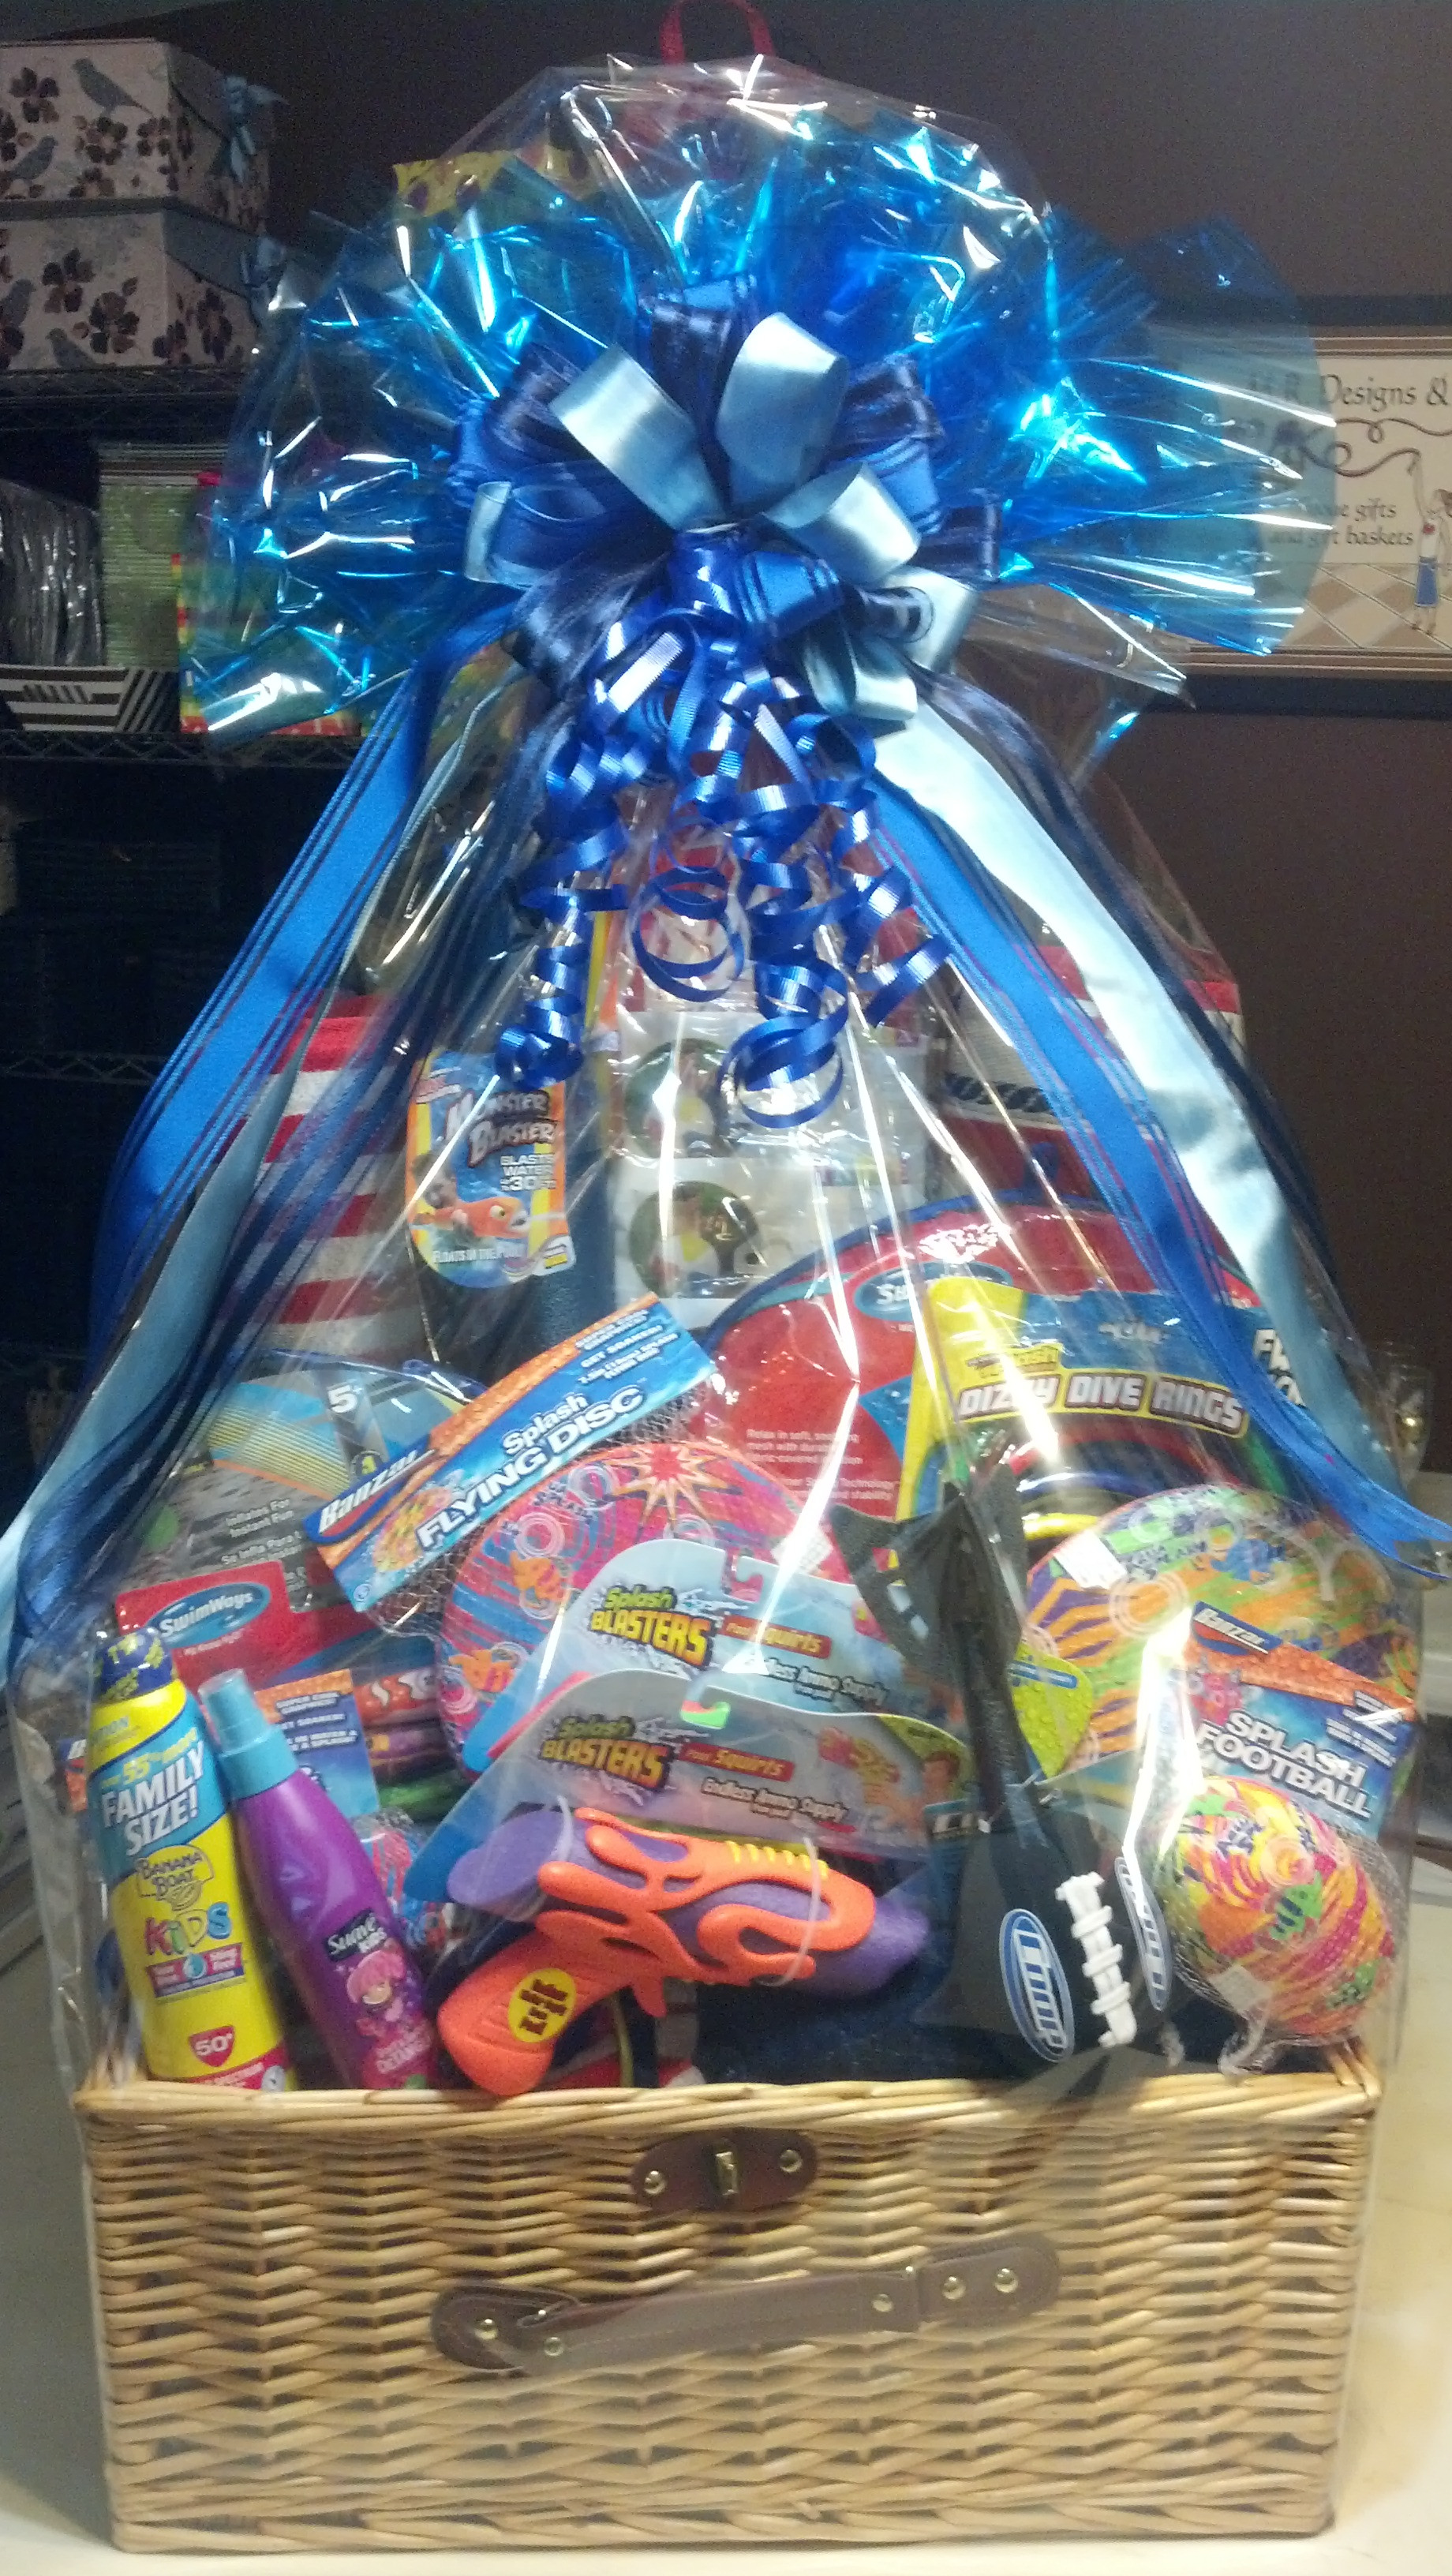 Gift Basket Raffle Ideas
 Special Event and Silent Auction Gift Basket Ideas by M R